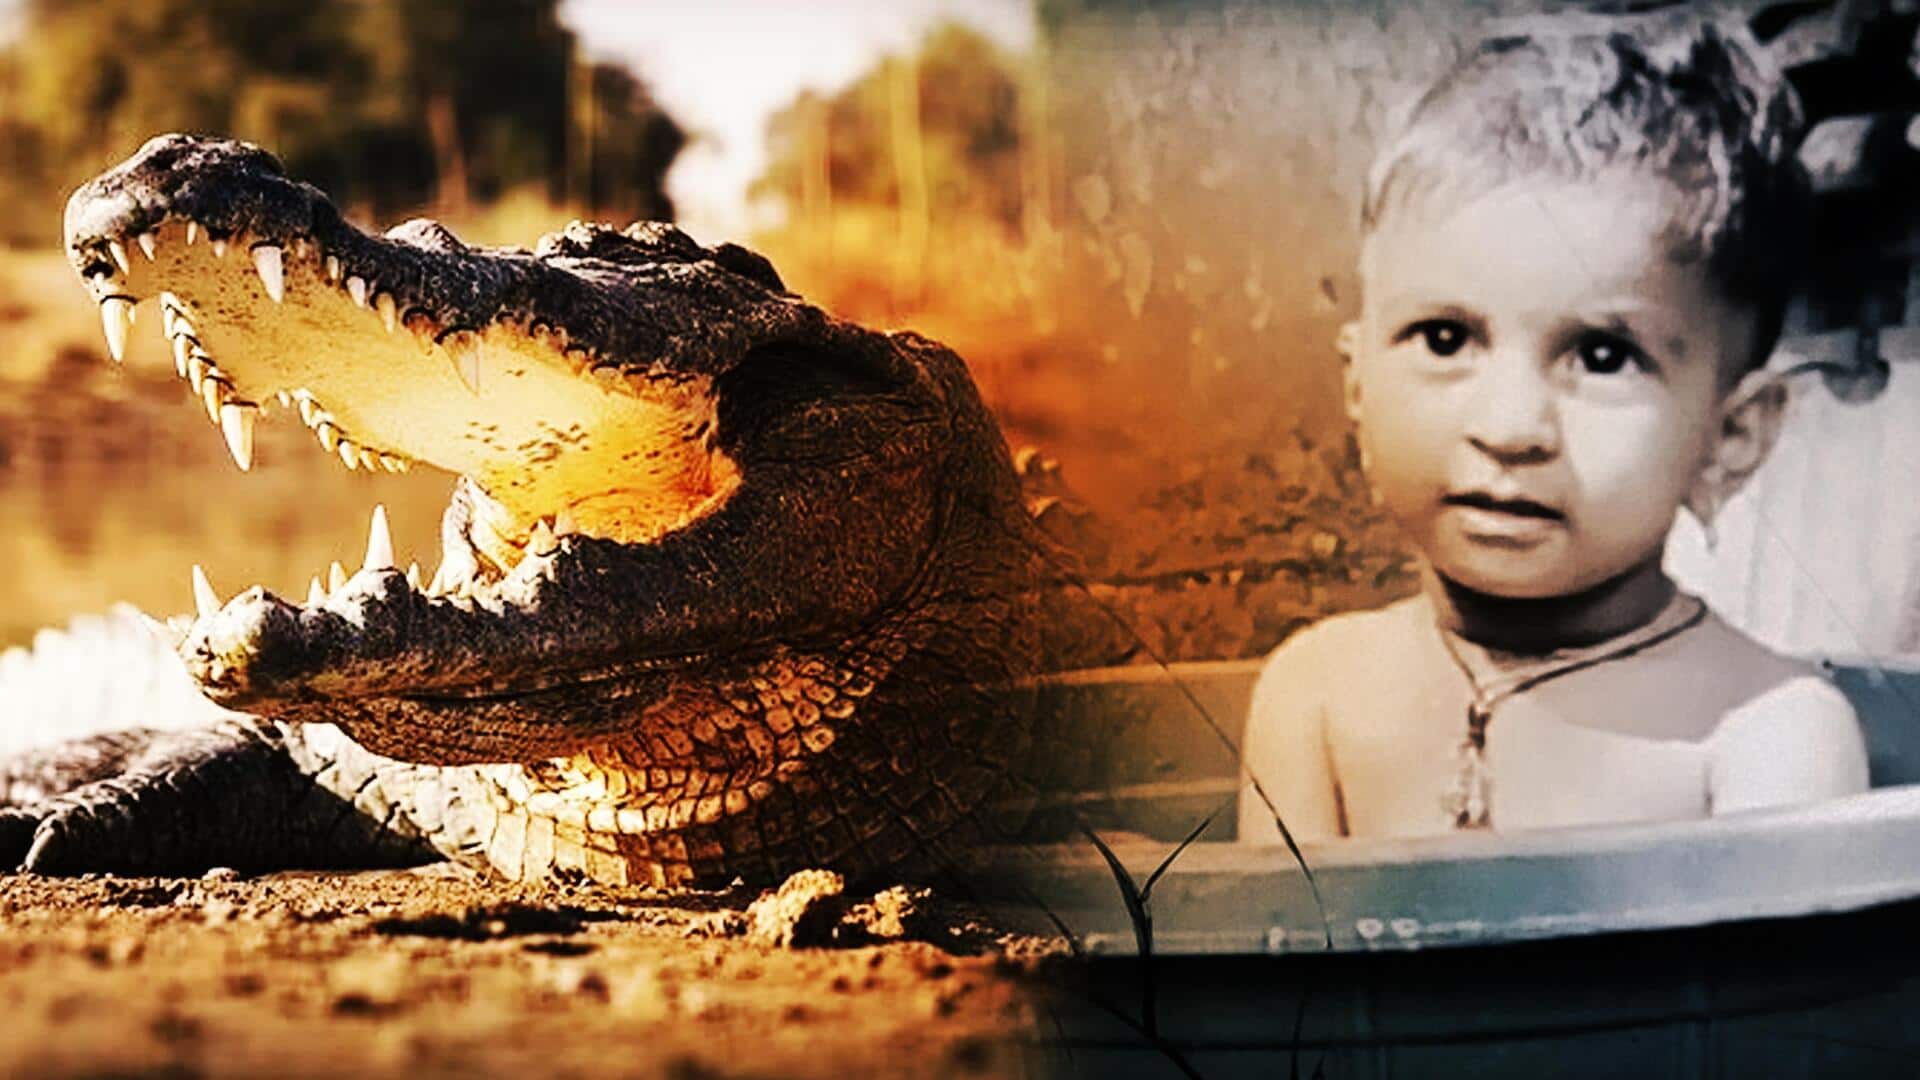 Mother throws speech-impaired son into crocodile-infested river: Report